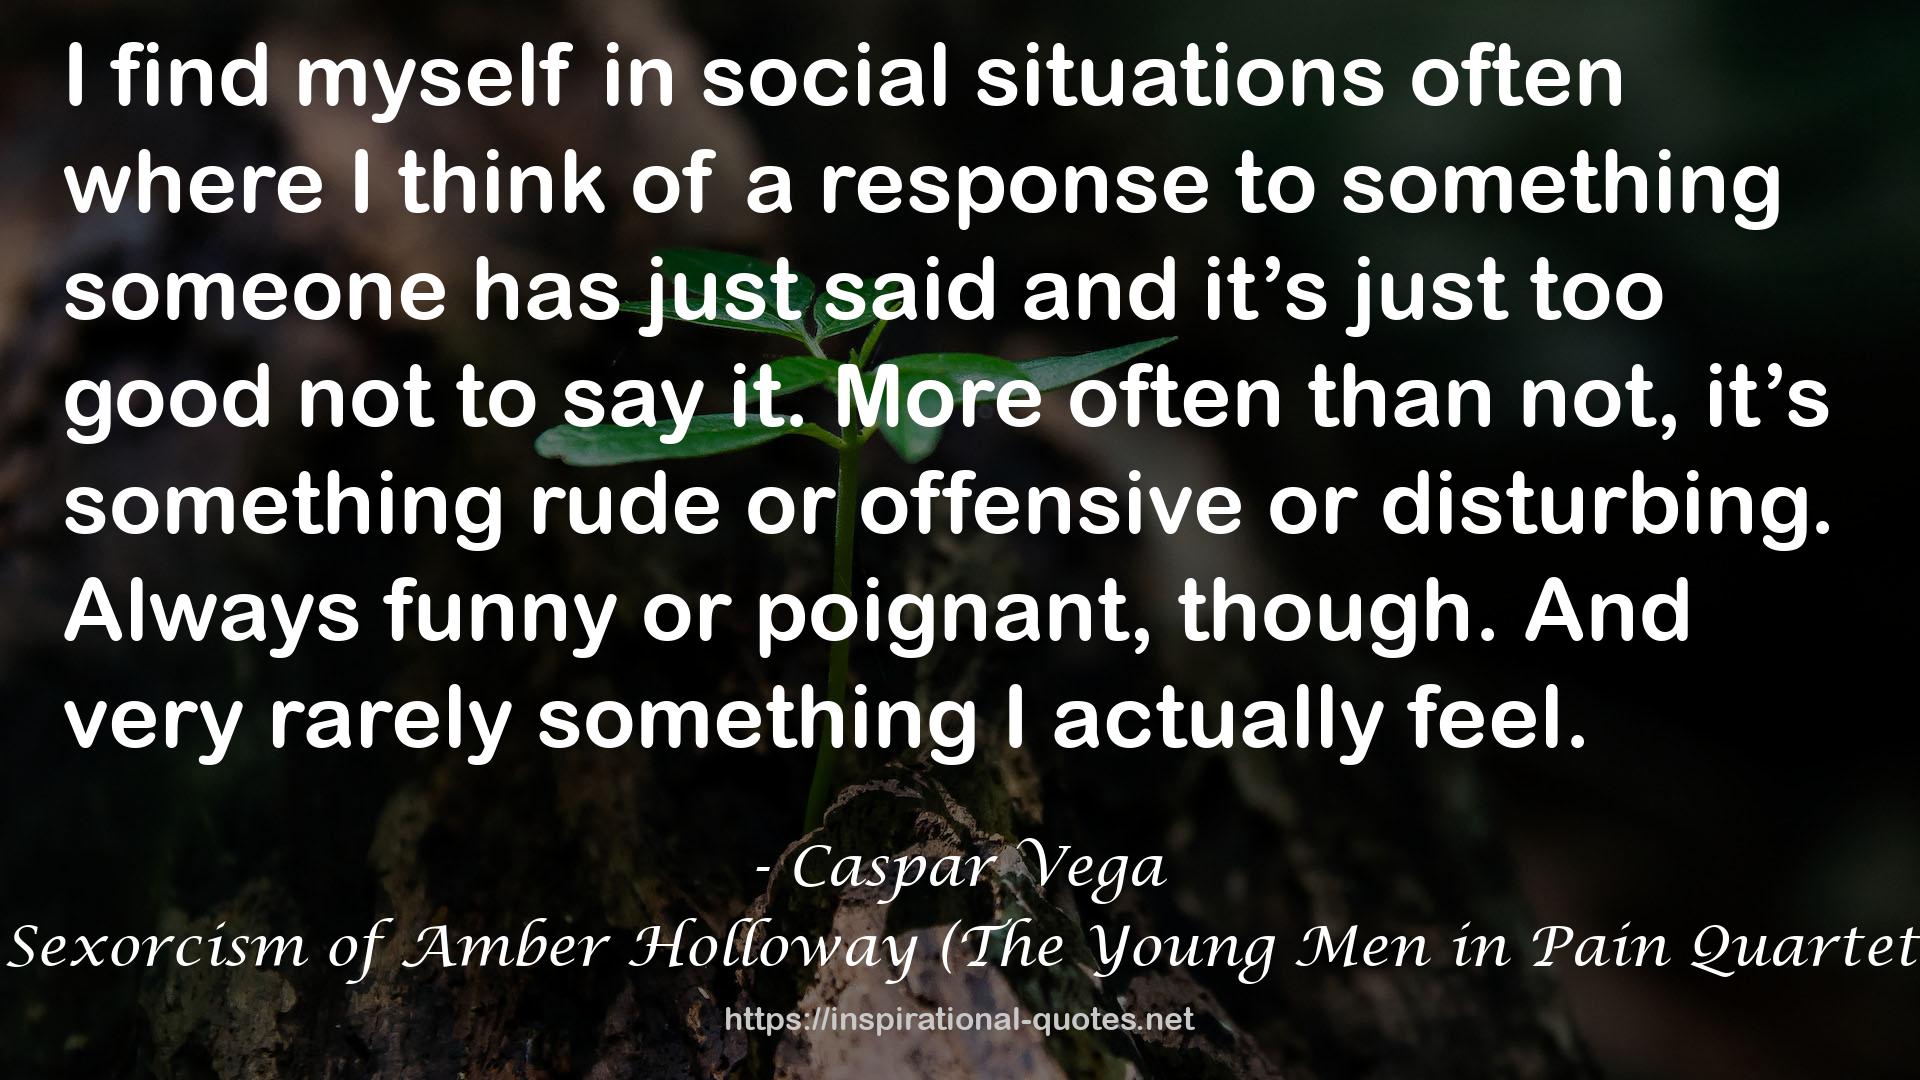 The Sexorcism of Amber Holloway (The Young Men in Pain Quartet, #2) QUOTES